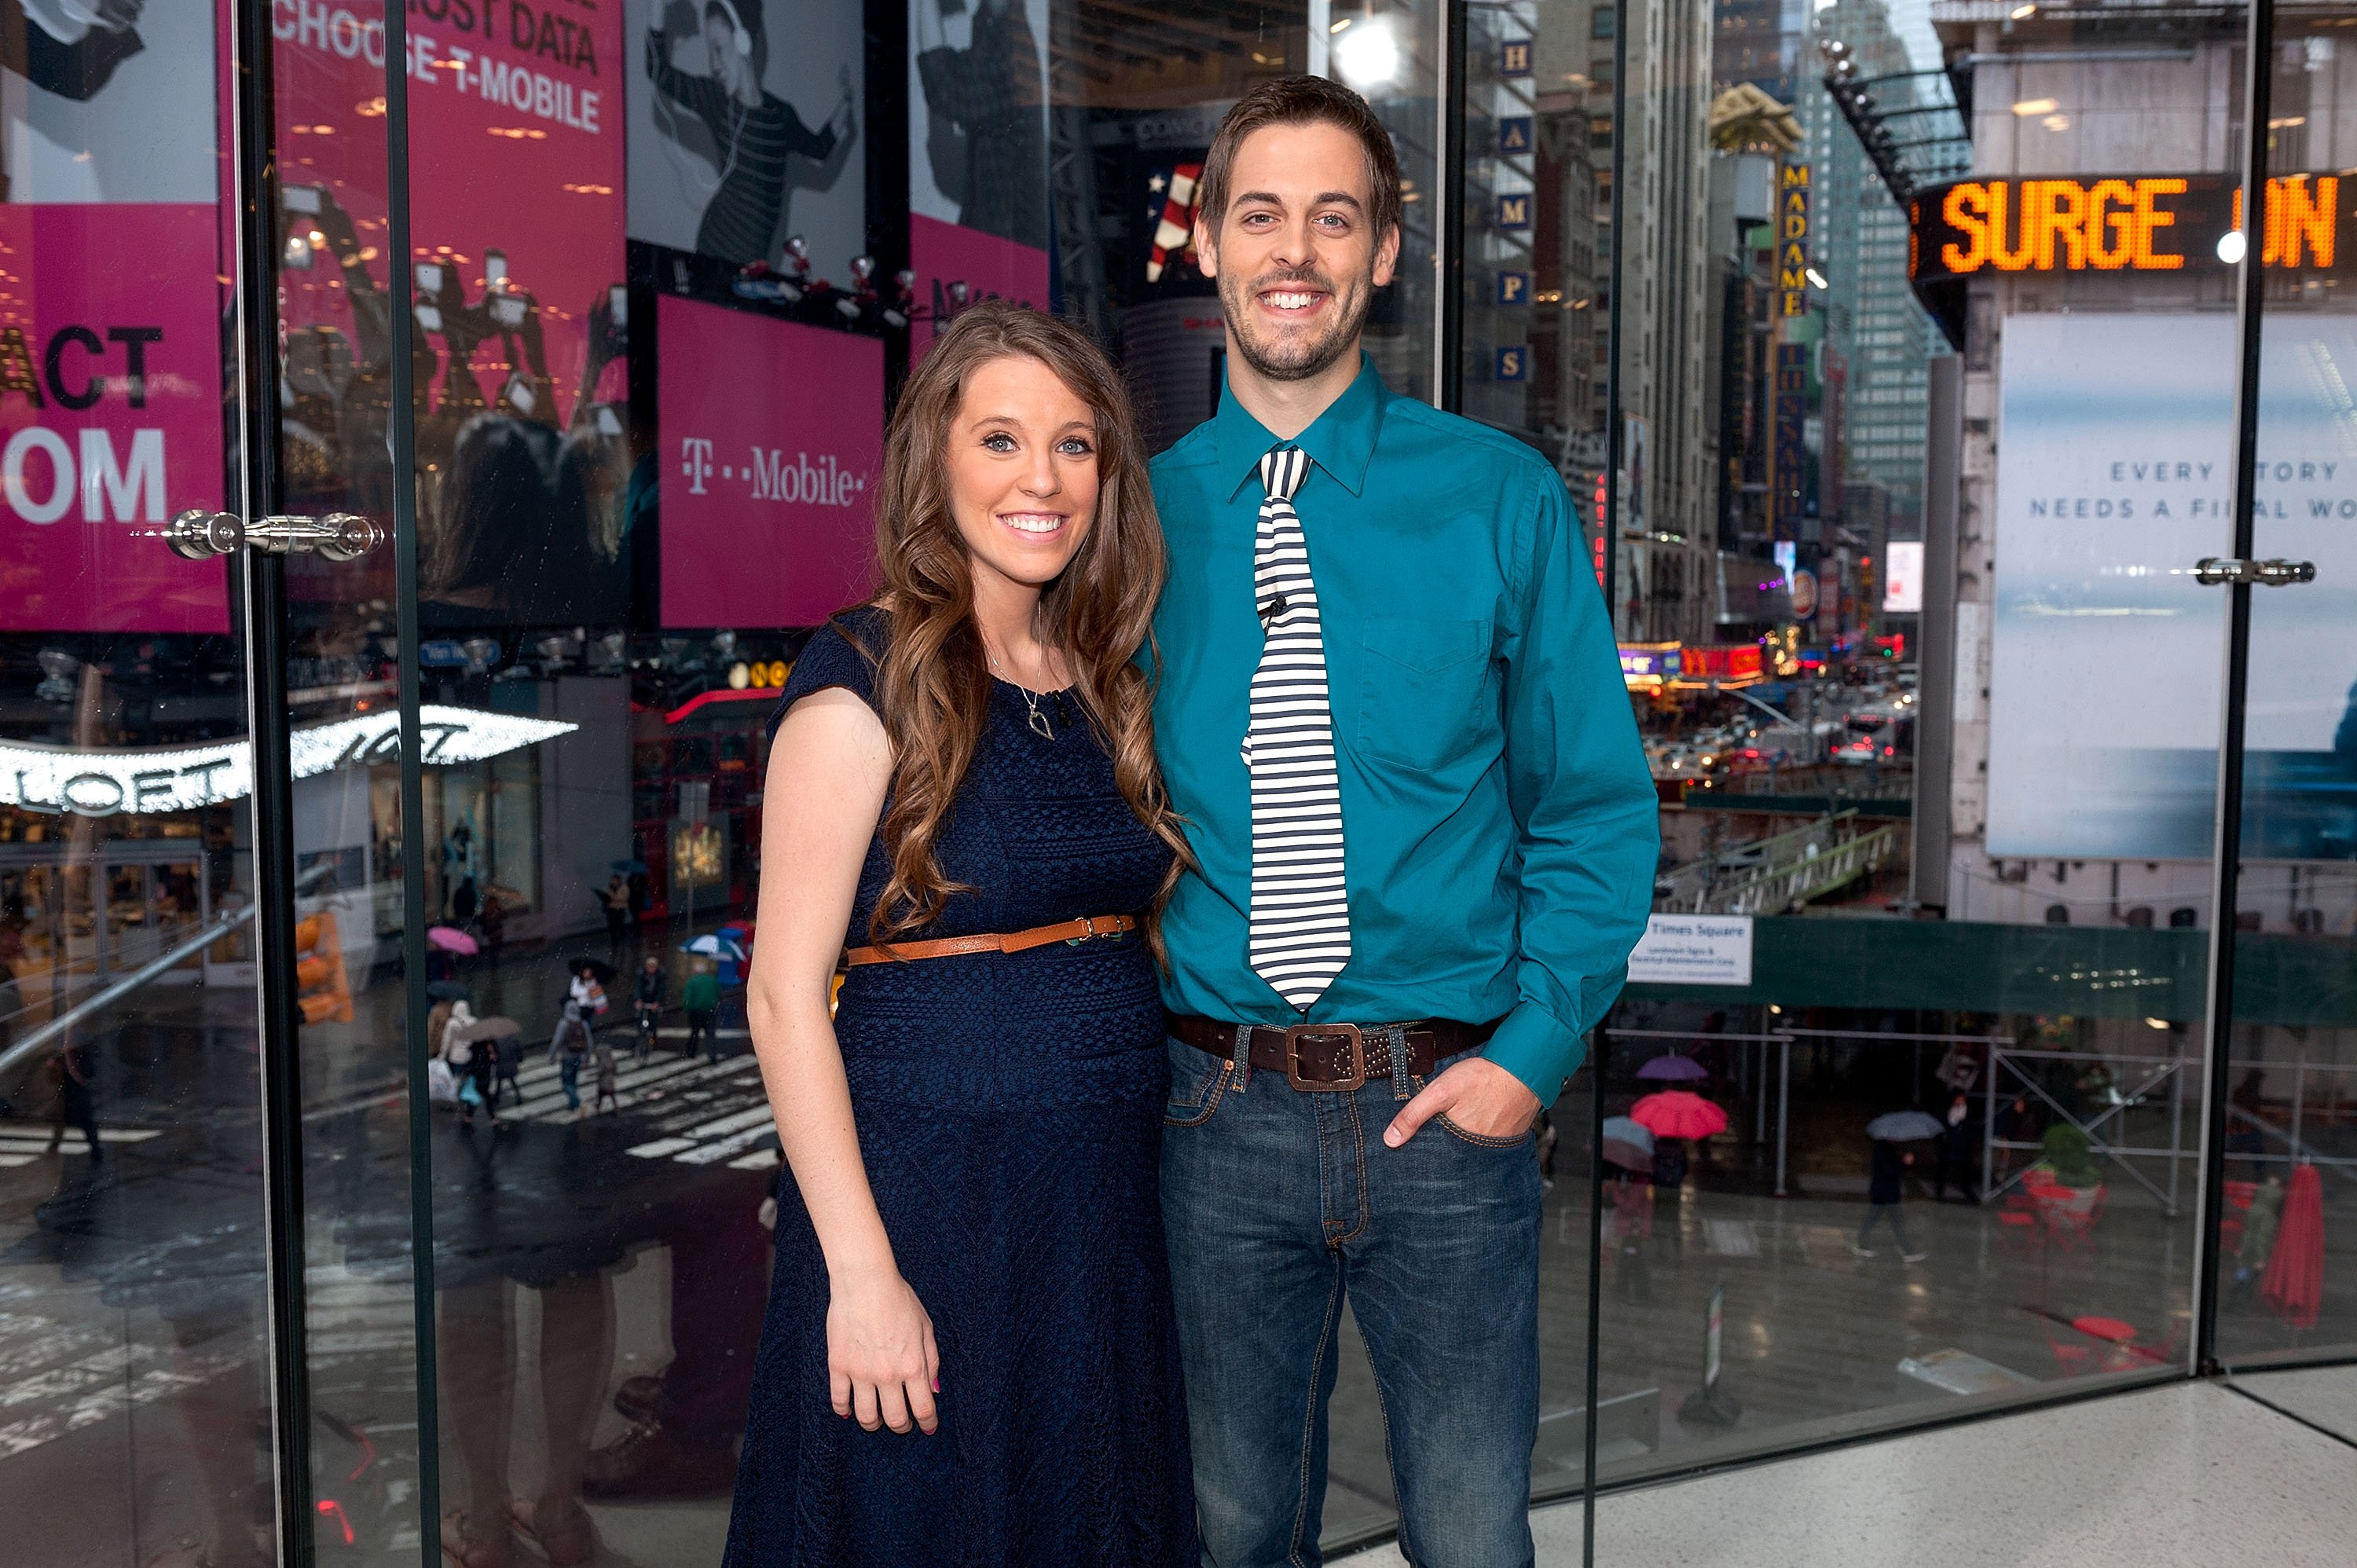 Josh Duggar's sister Jill Duggar, who is pregnant, poses with her husband Derick Dillard during an appearance on 'Extra'